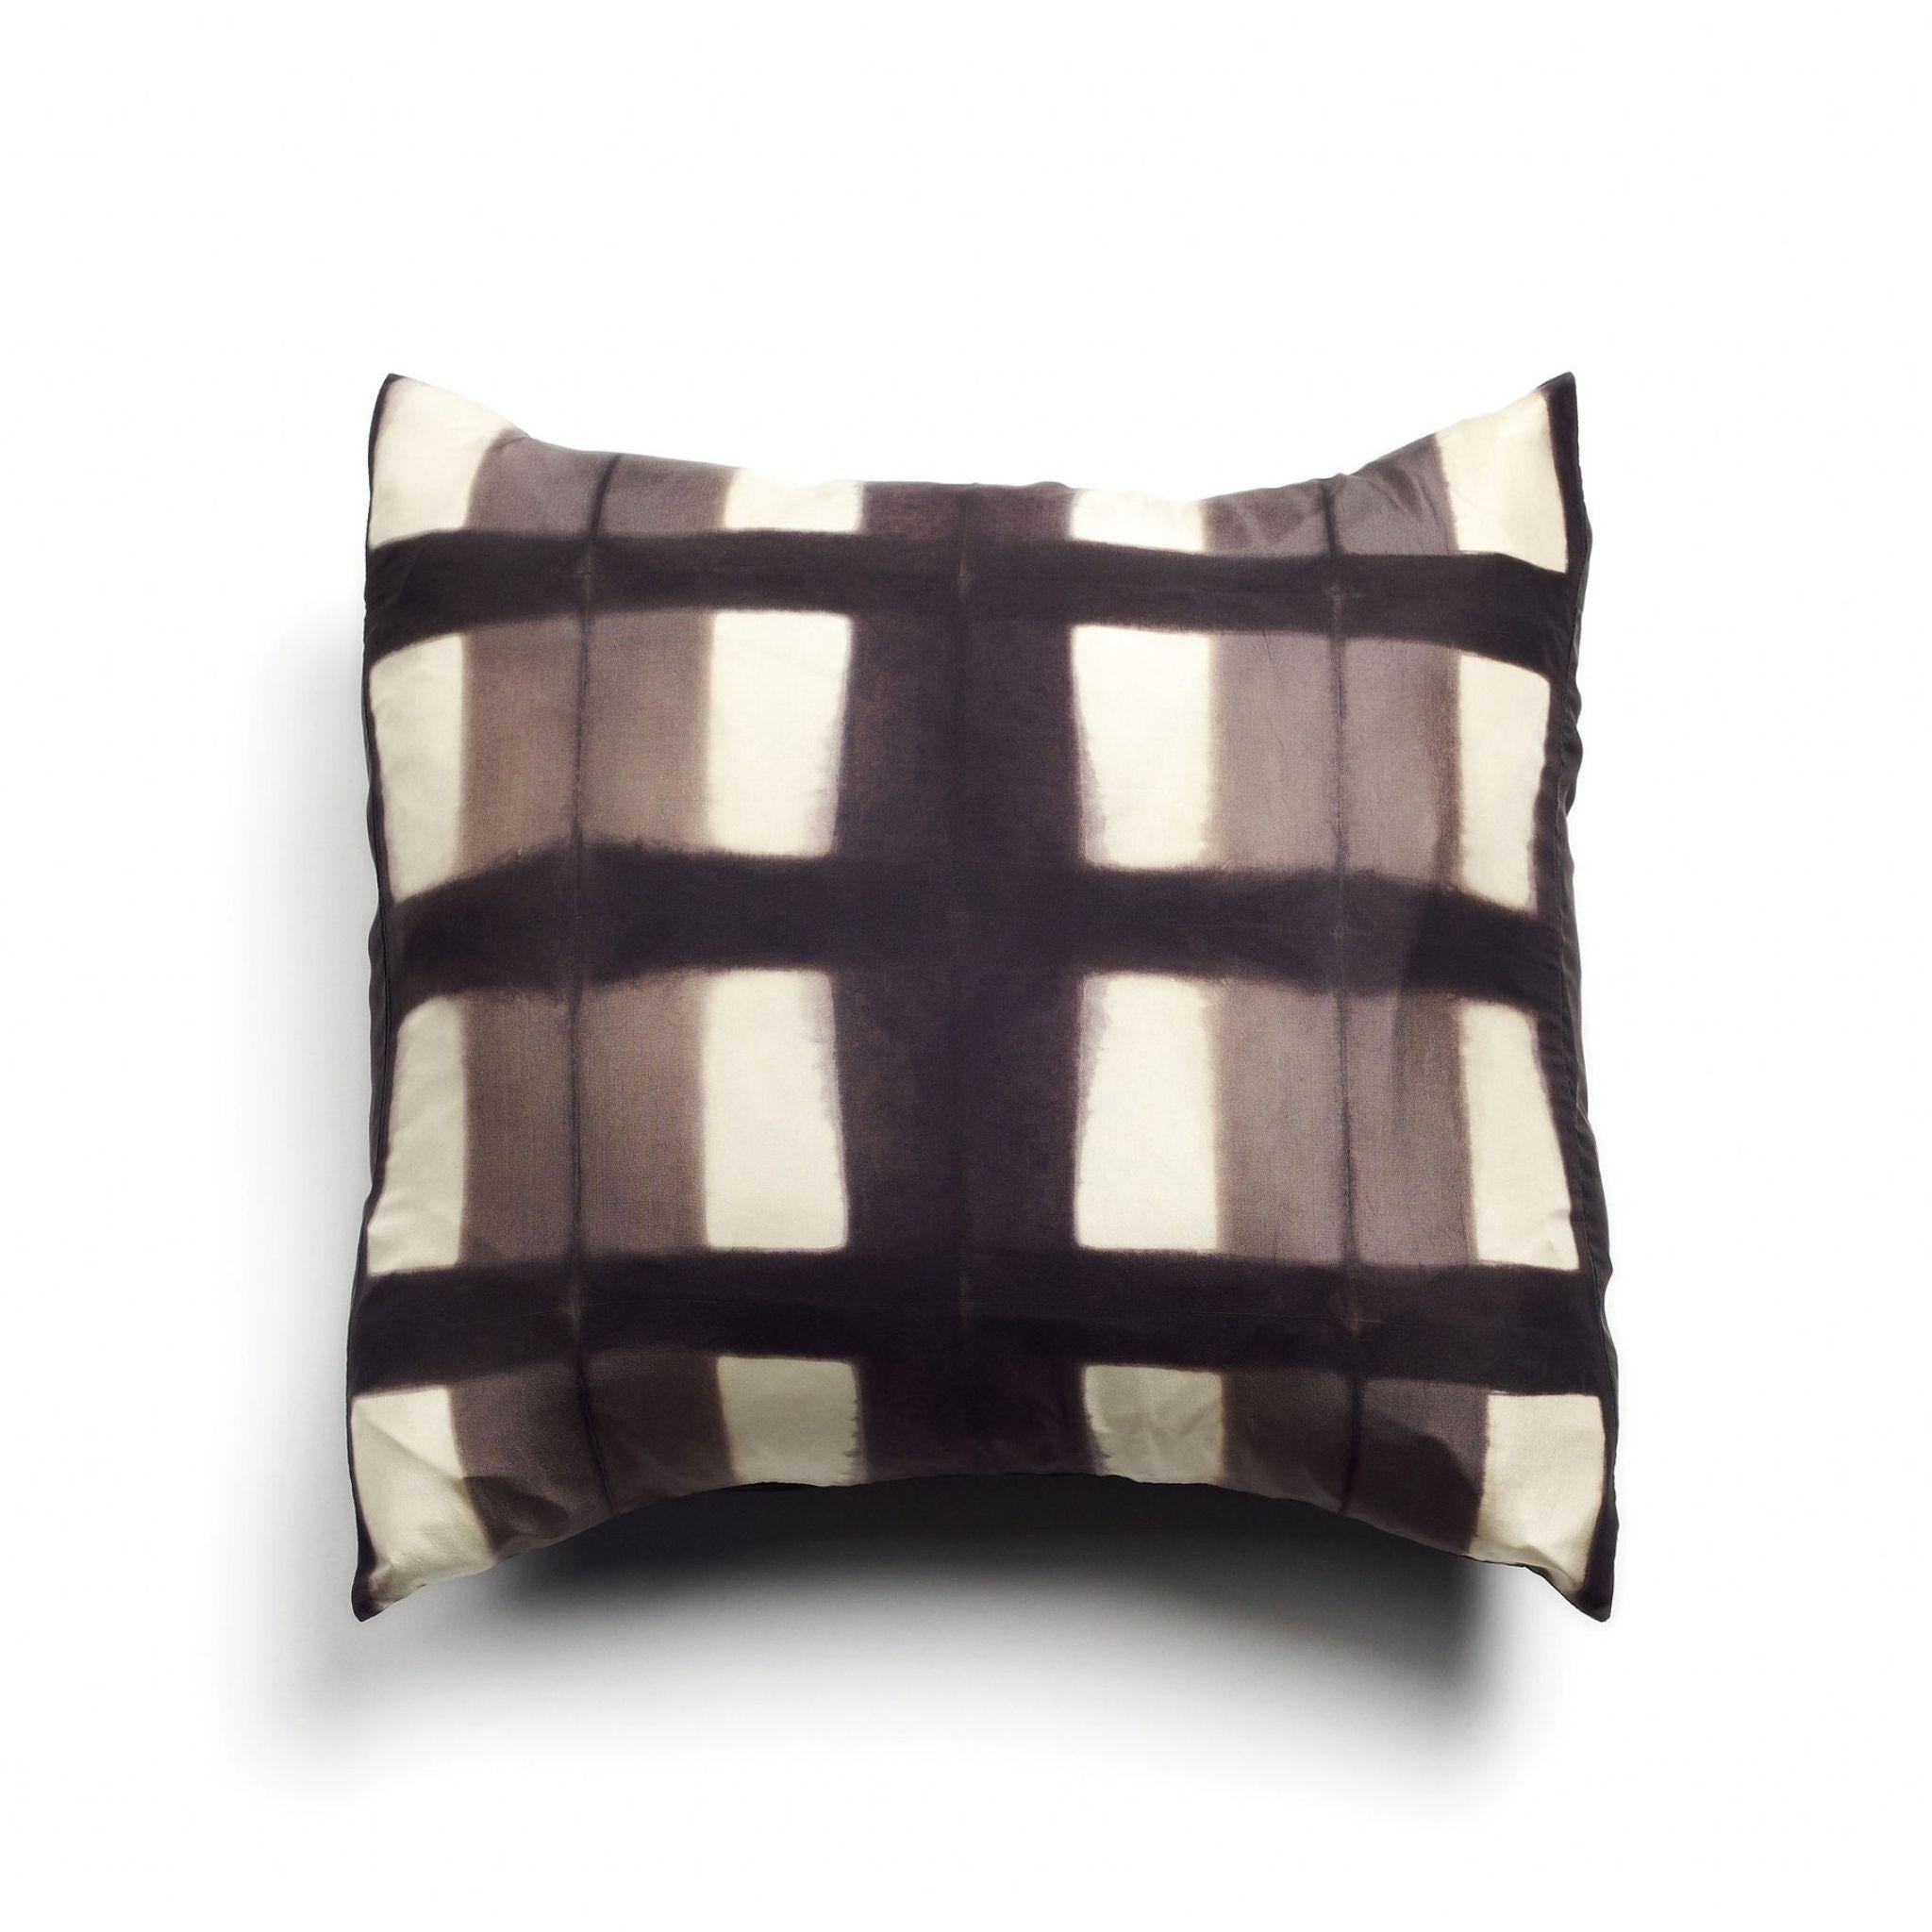 Melo Black silk pillow is luxurious and exquisite with its classic block shibori print. As this pillow is 100% handmade from start to finish, each piece is unique and will have a slight variation which is the beauty of the handmade process.

​In